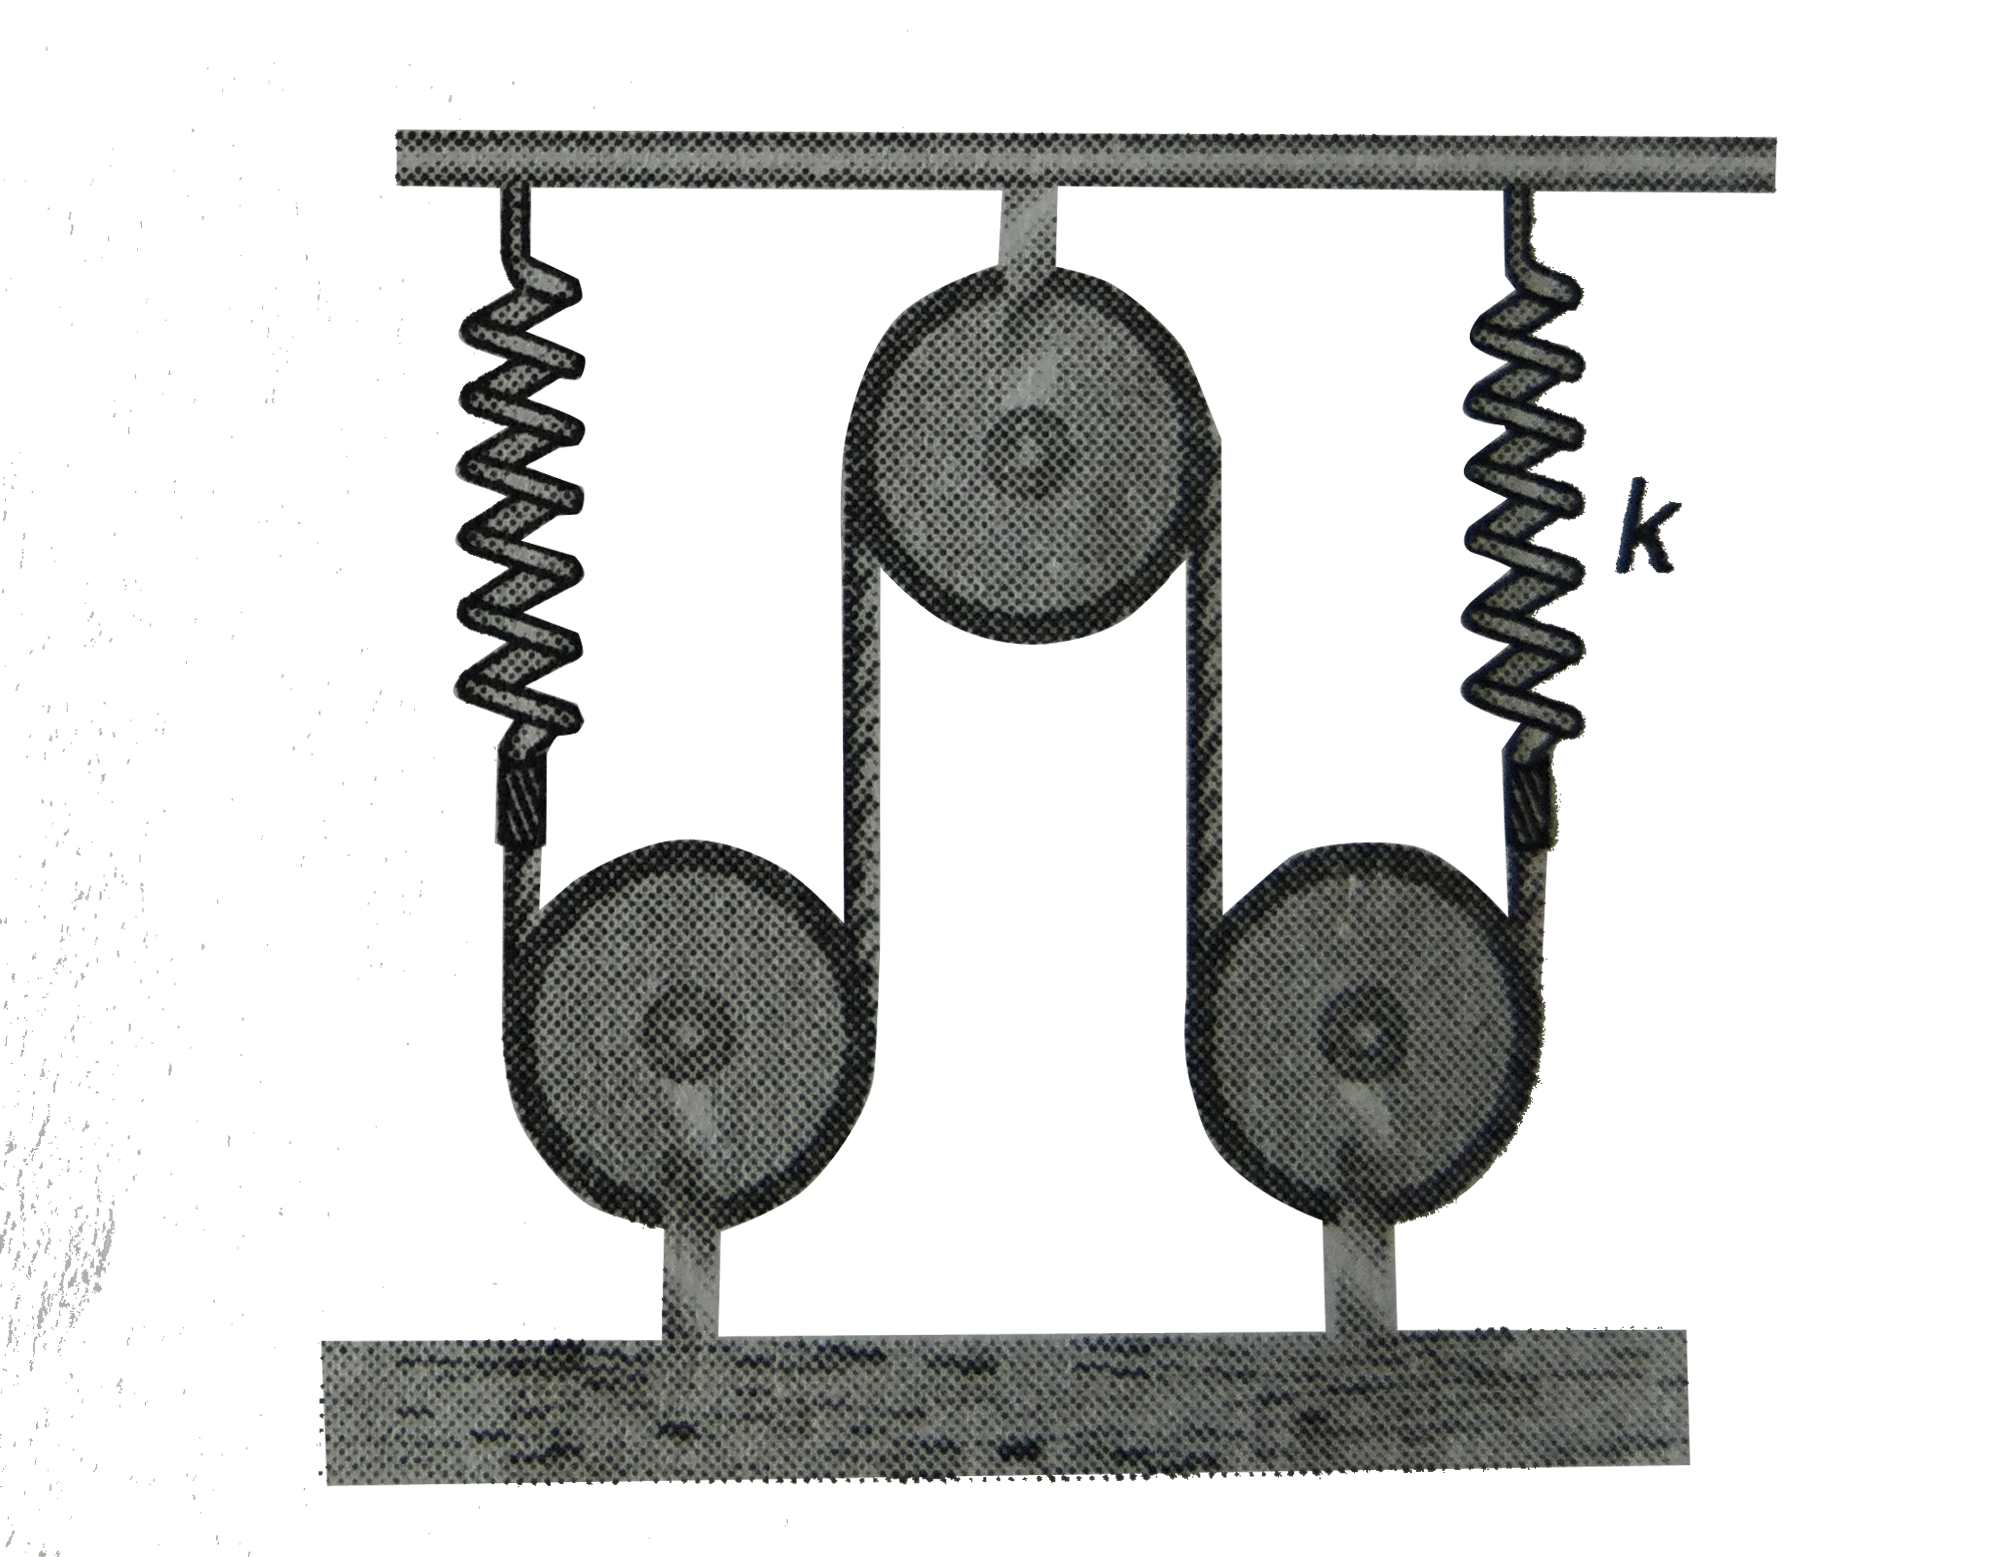 Find the natural frequency of the system shown in figure. The pulleys are smooth and massless.